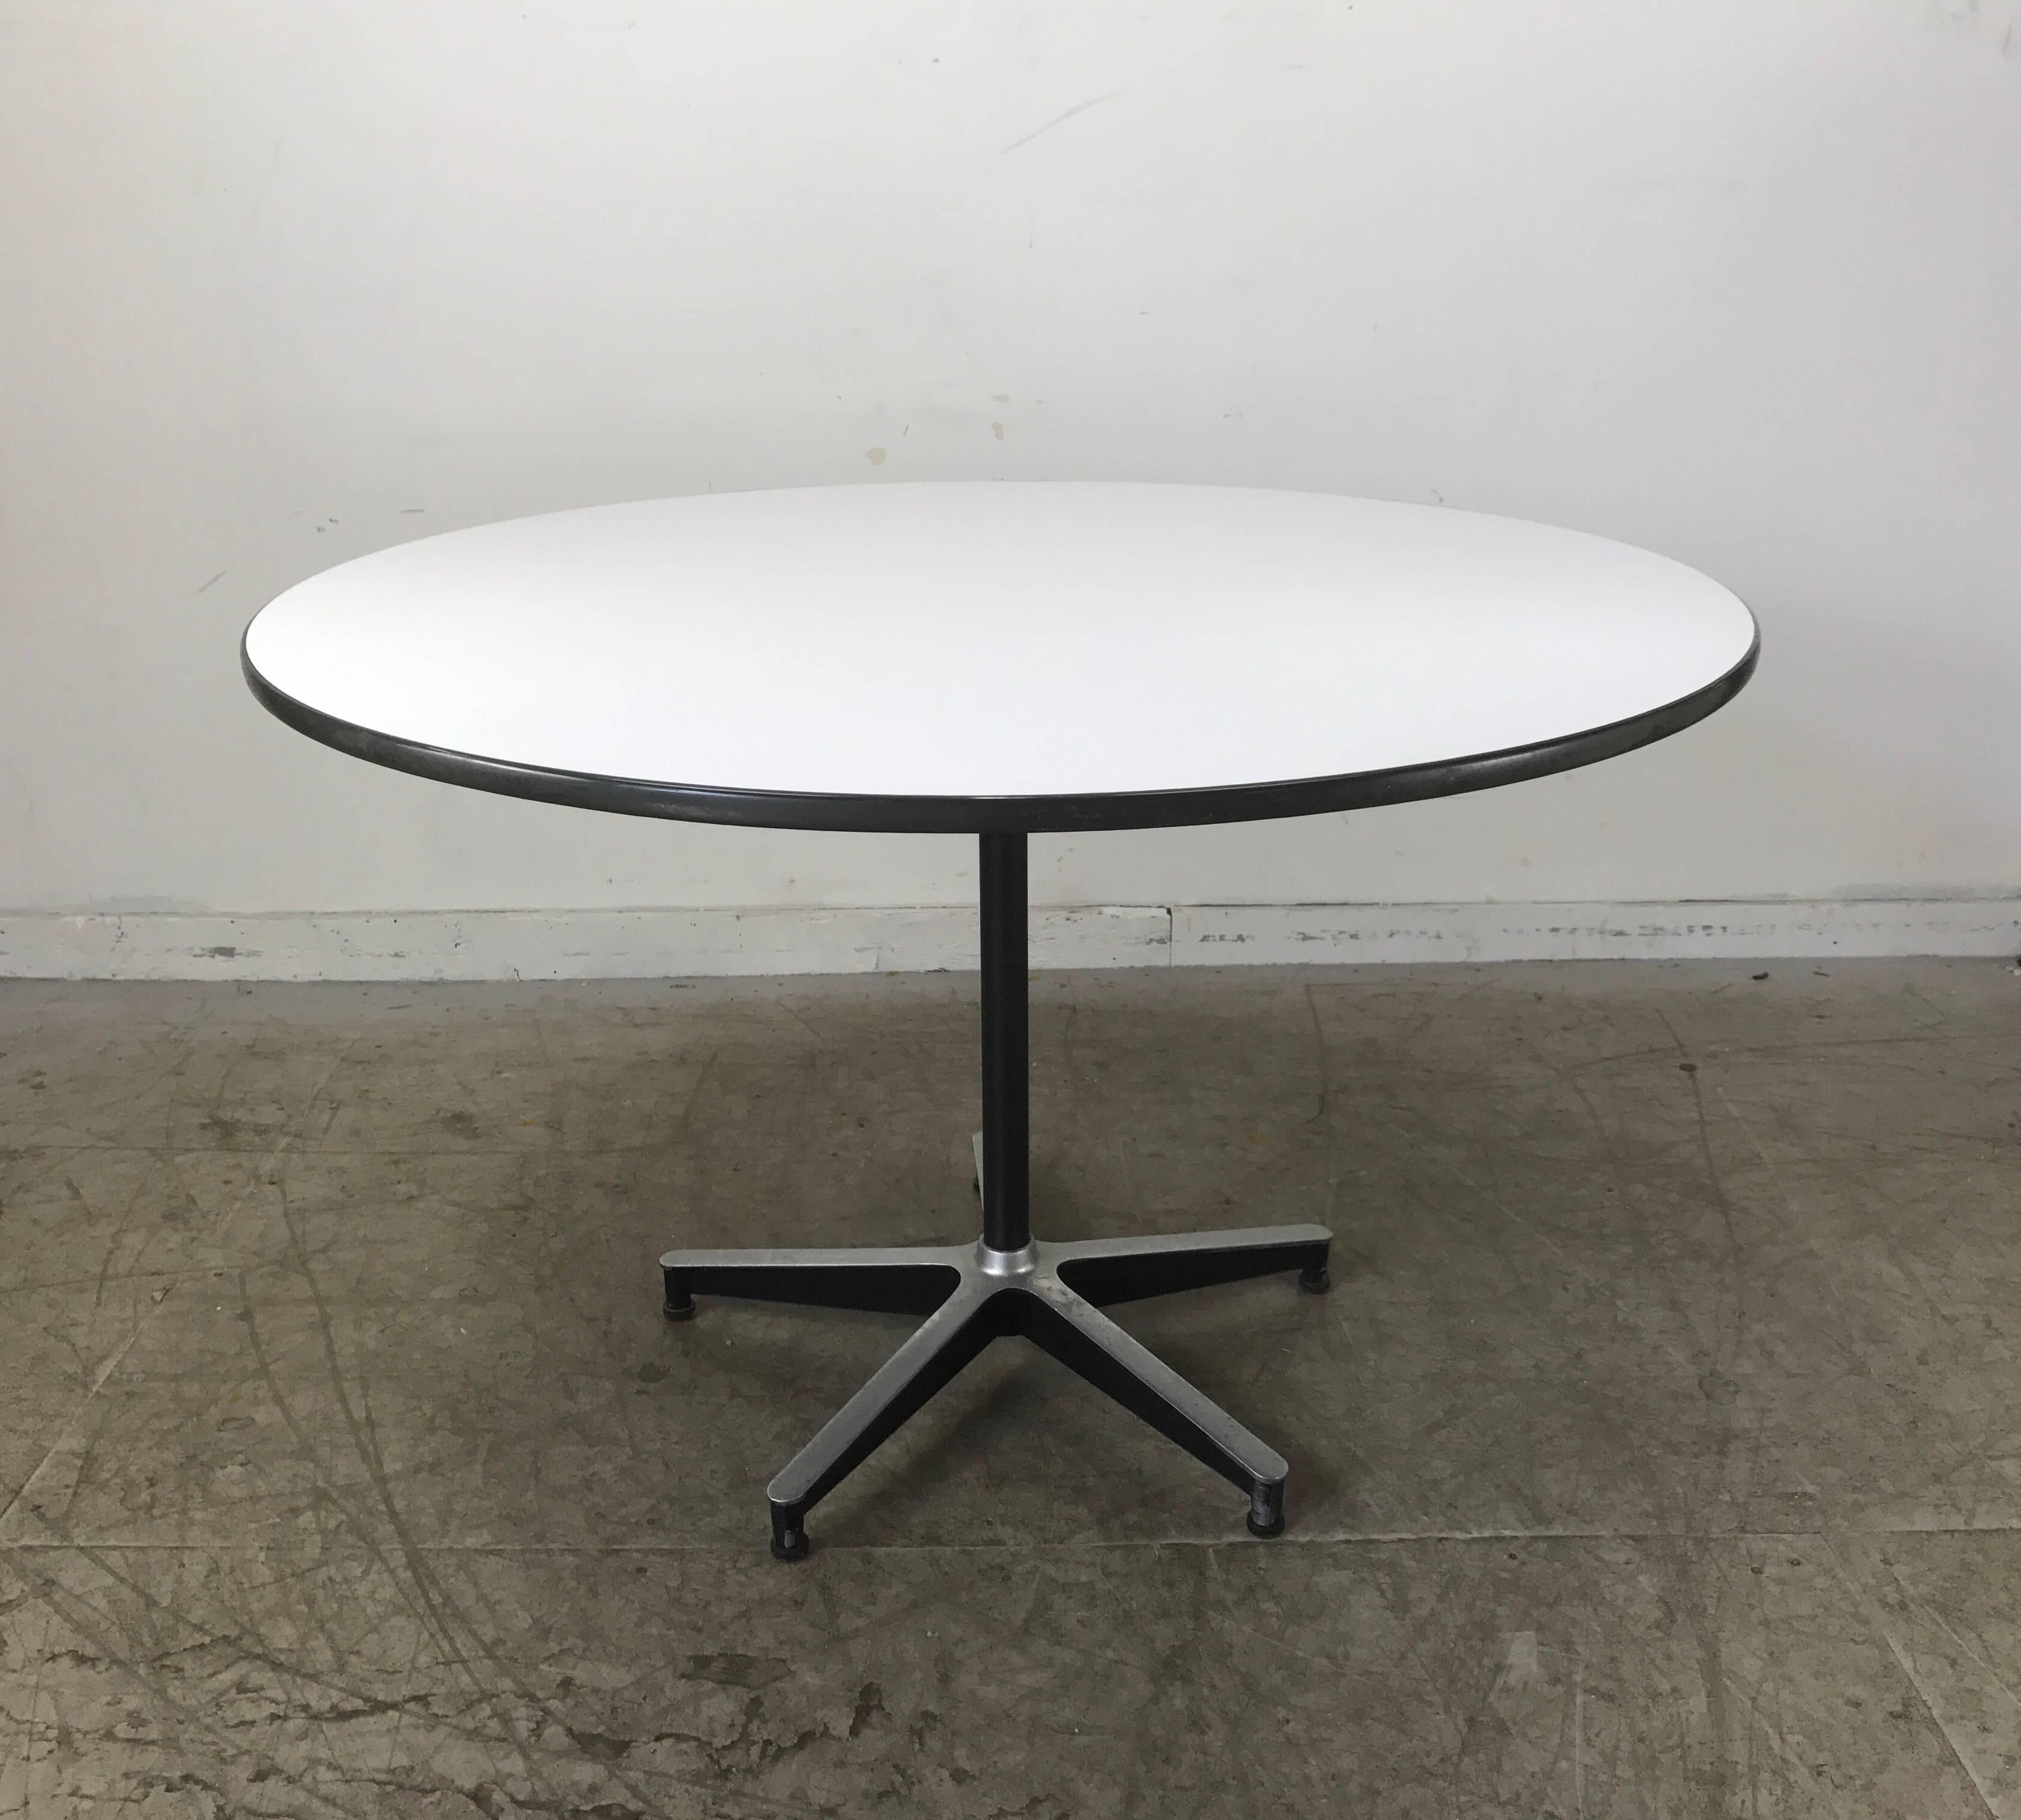 Classic Dinette or dining room set designed by Charles and Ray Eames manufactured by Herman Miller. Set includes white laminate table with five star aluminum base. Set of four fiberglass side shell chairs with original swivel four star alumimum